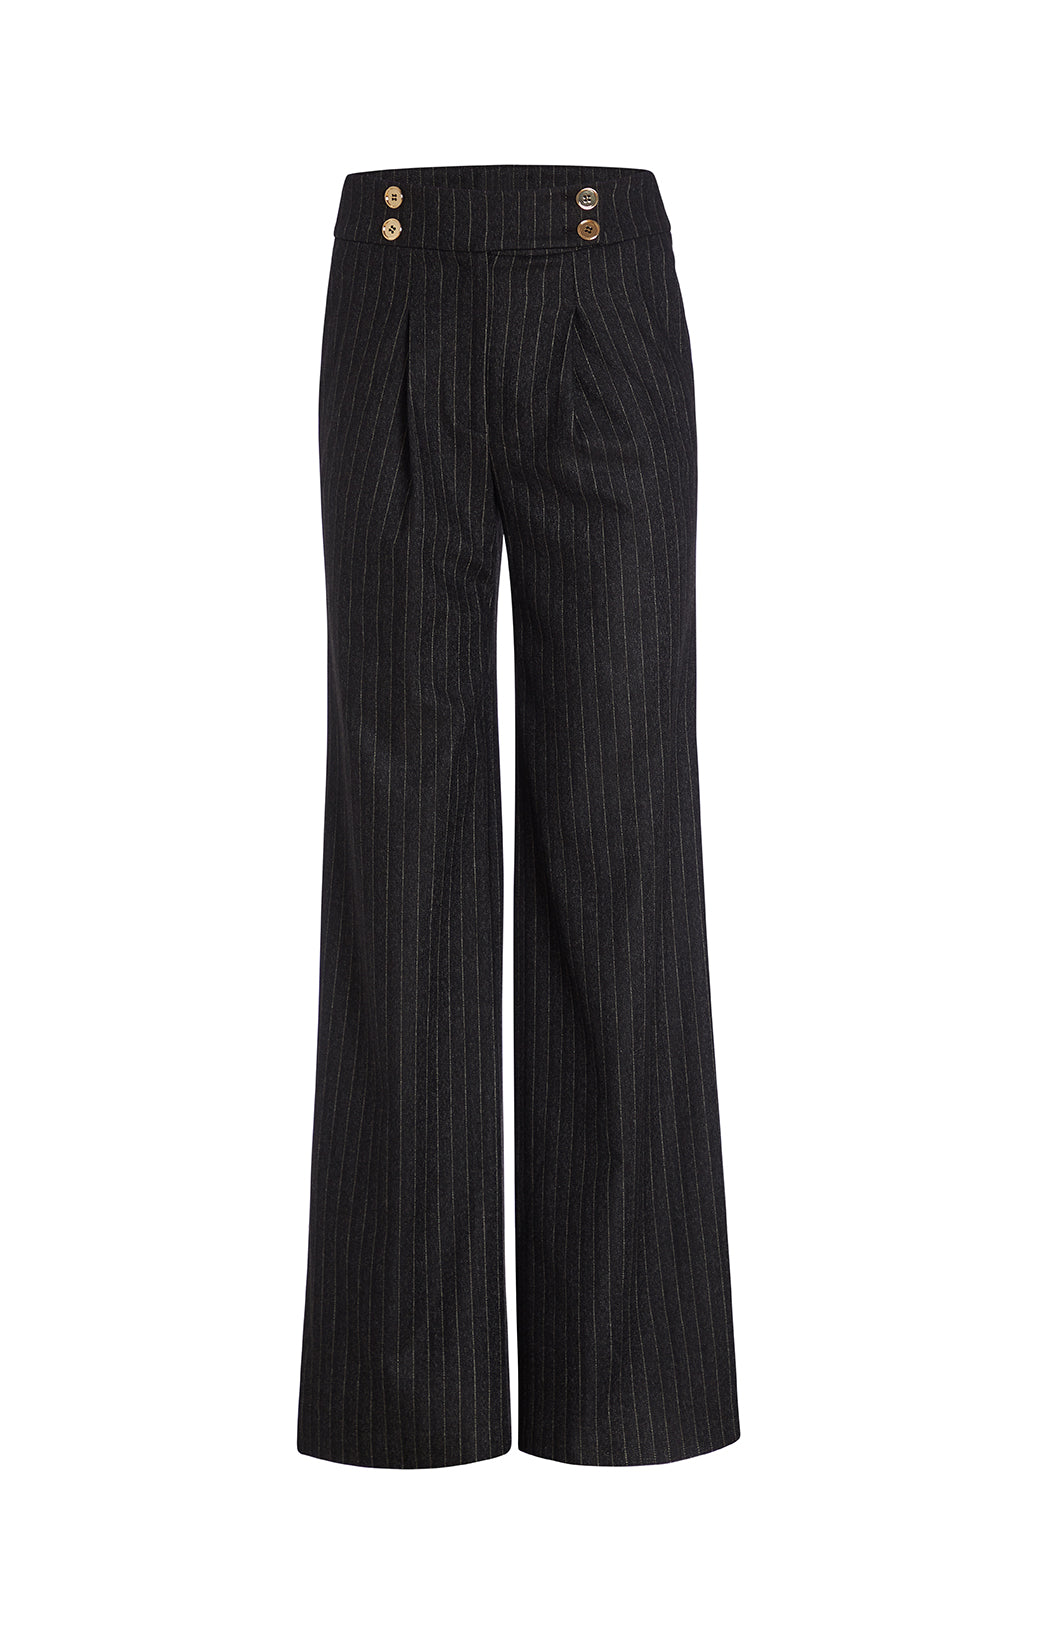 Flare - Pull-On, Wide-Leg Ponte Pants -  Product Image